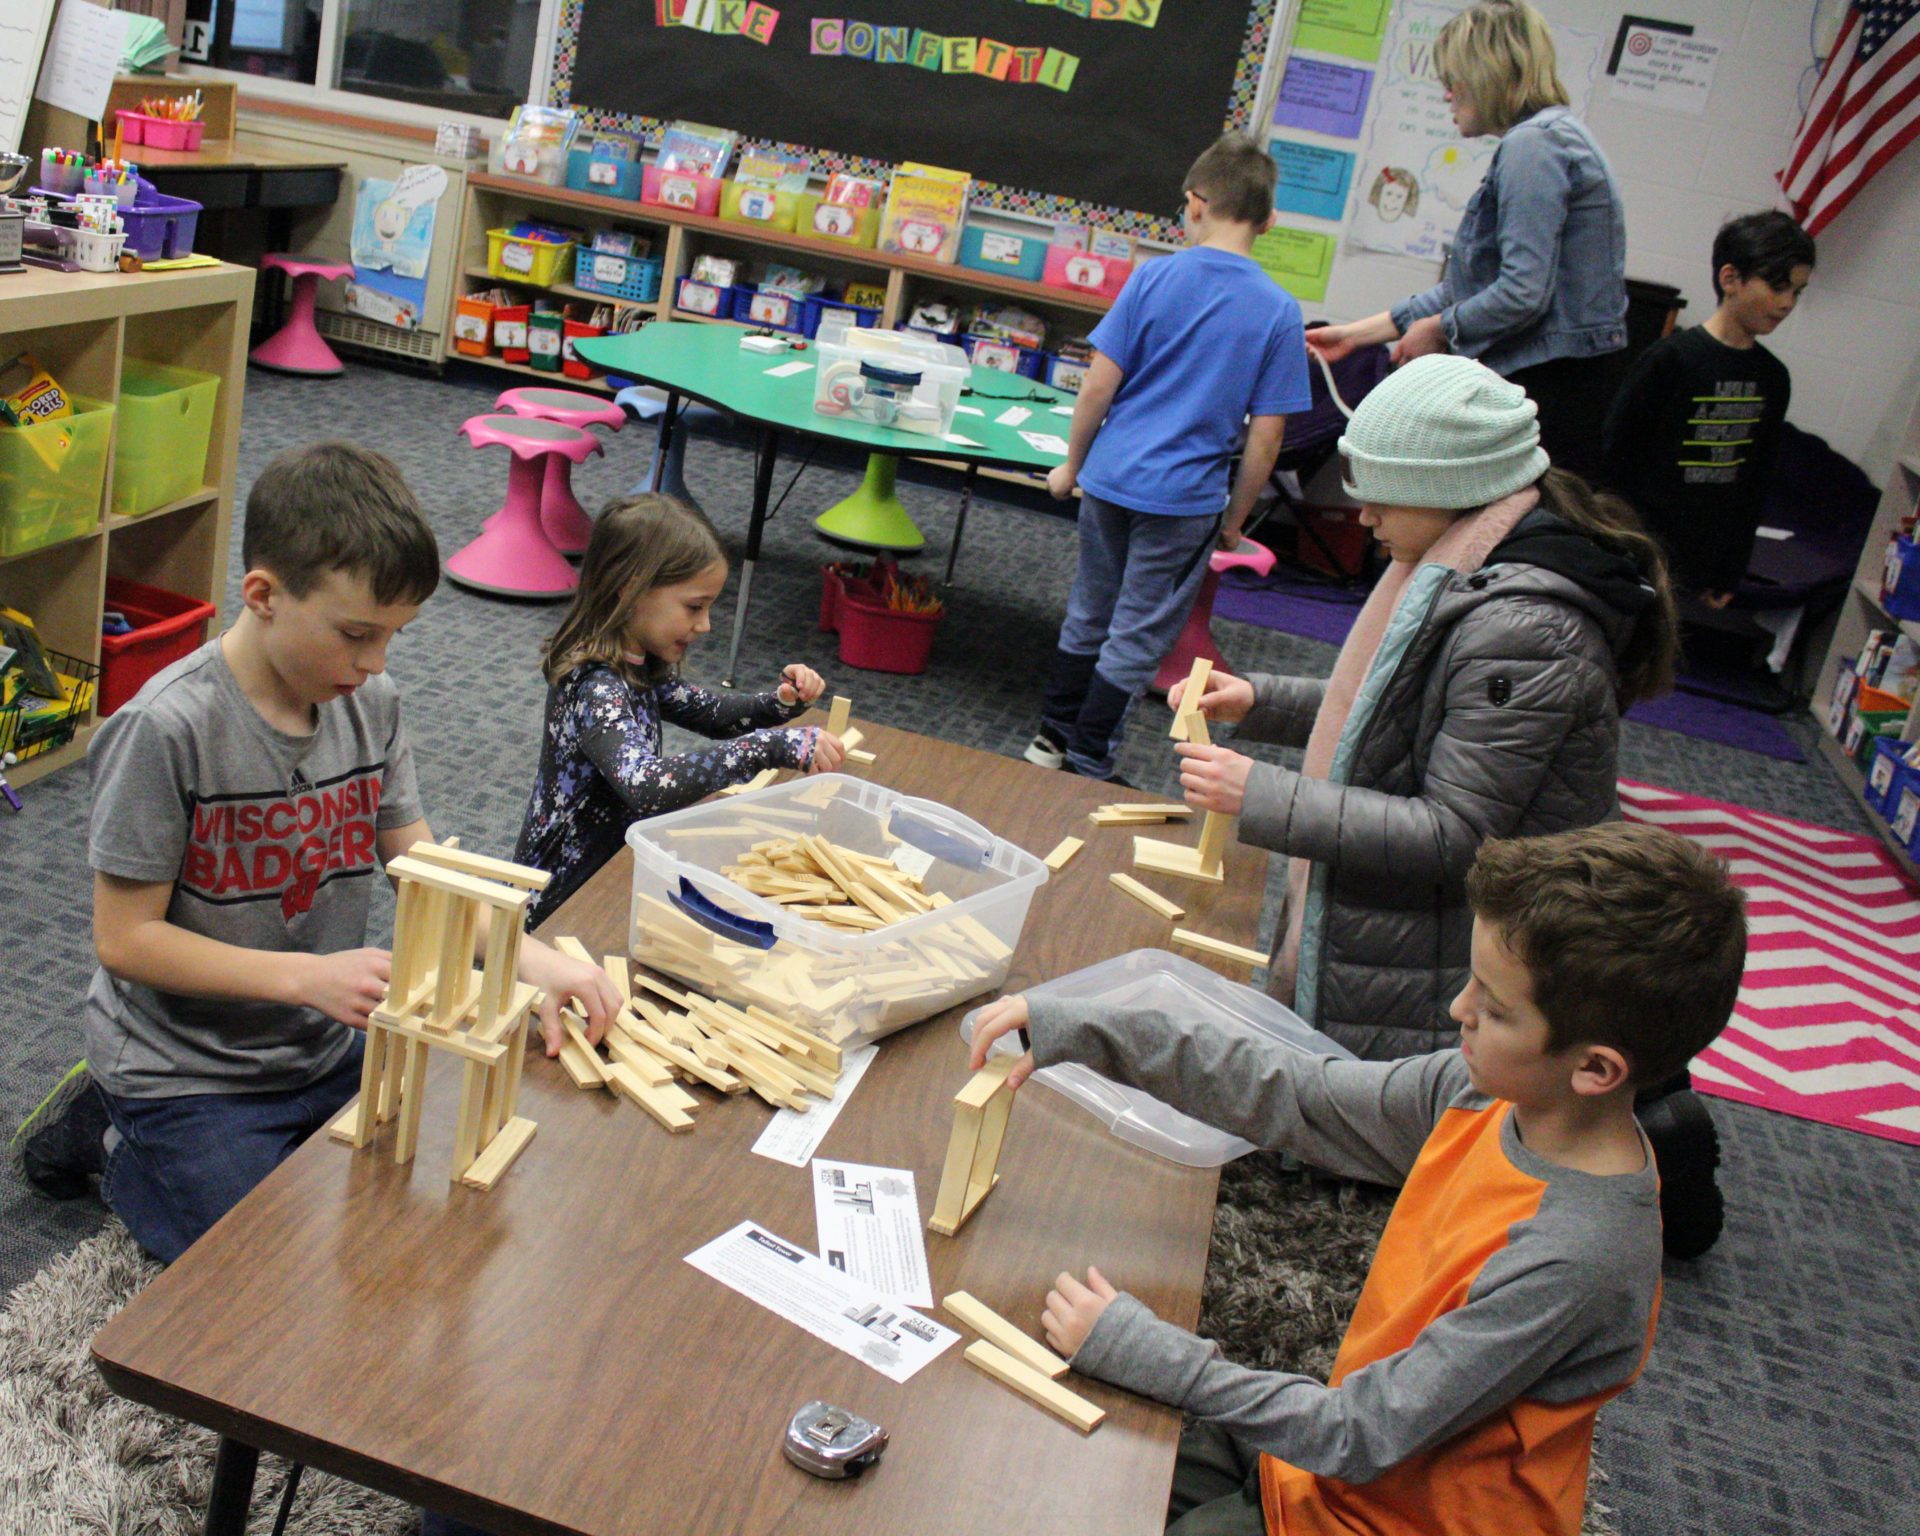 A group of students building with small wooden blocks.